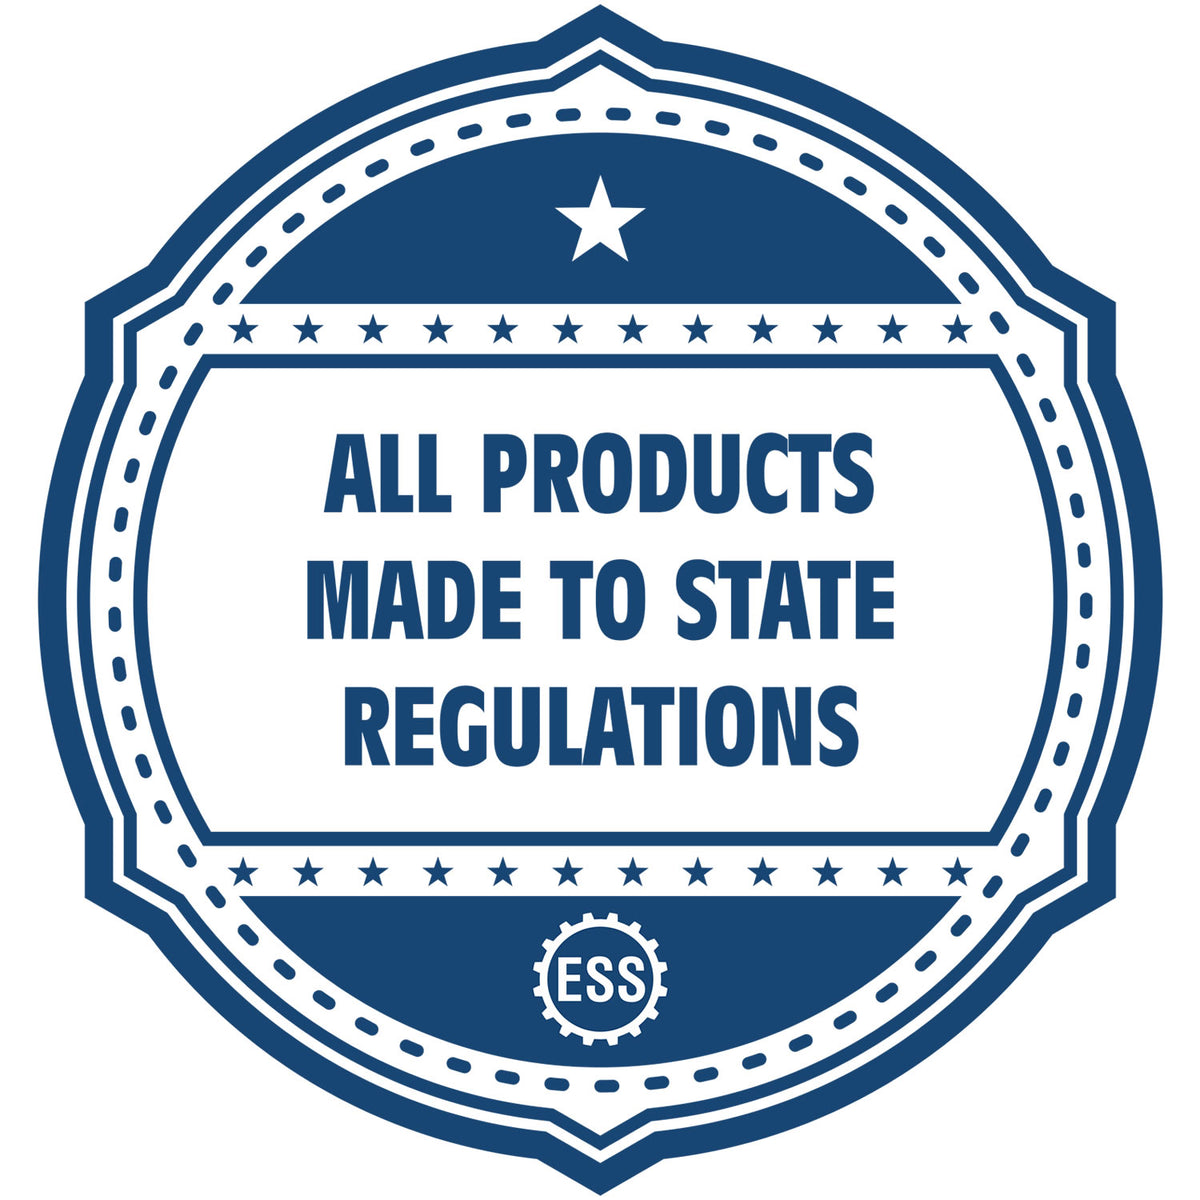 A blue icon or badge for the Digital Ohio Geologist Stamp, Electronic Seal for Ohio Geologist showing that this product is made in compliance with state regulations.